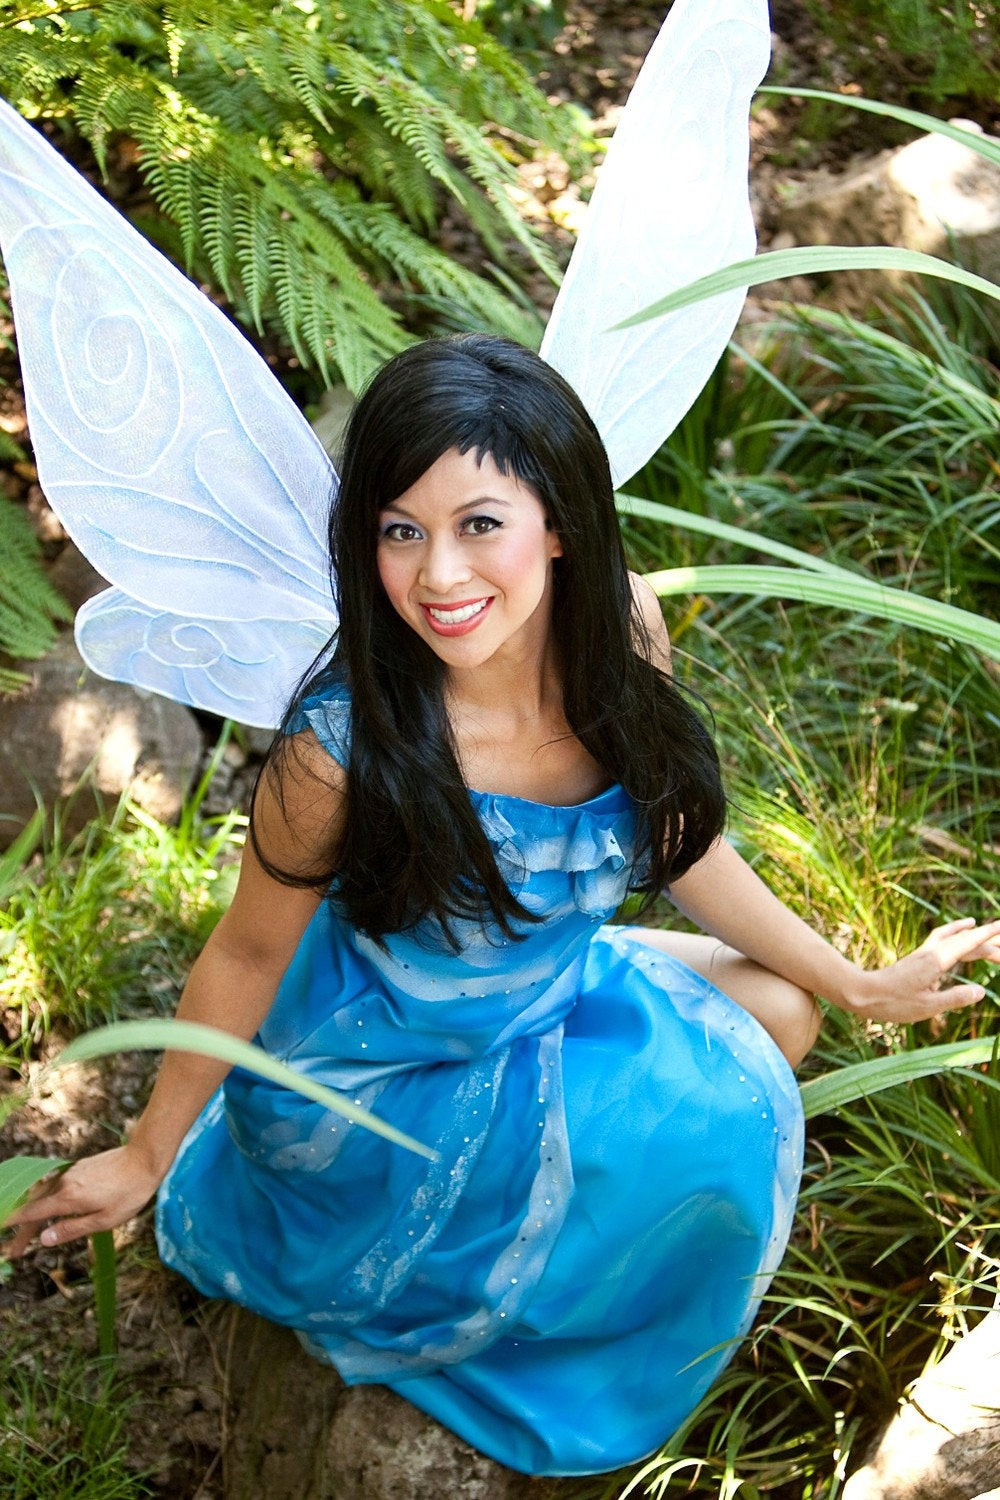 DIY Tinkerbell Costume For Adults
 Silvermist Tinkerbell Fairy Friend Adult Costume by